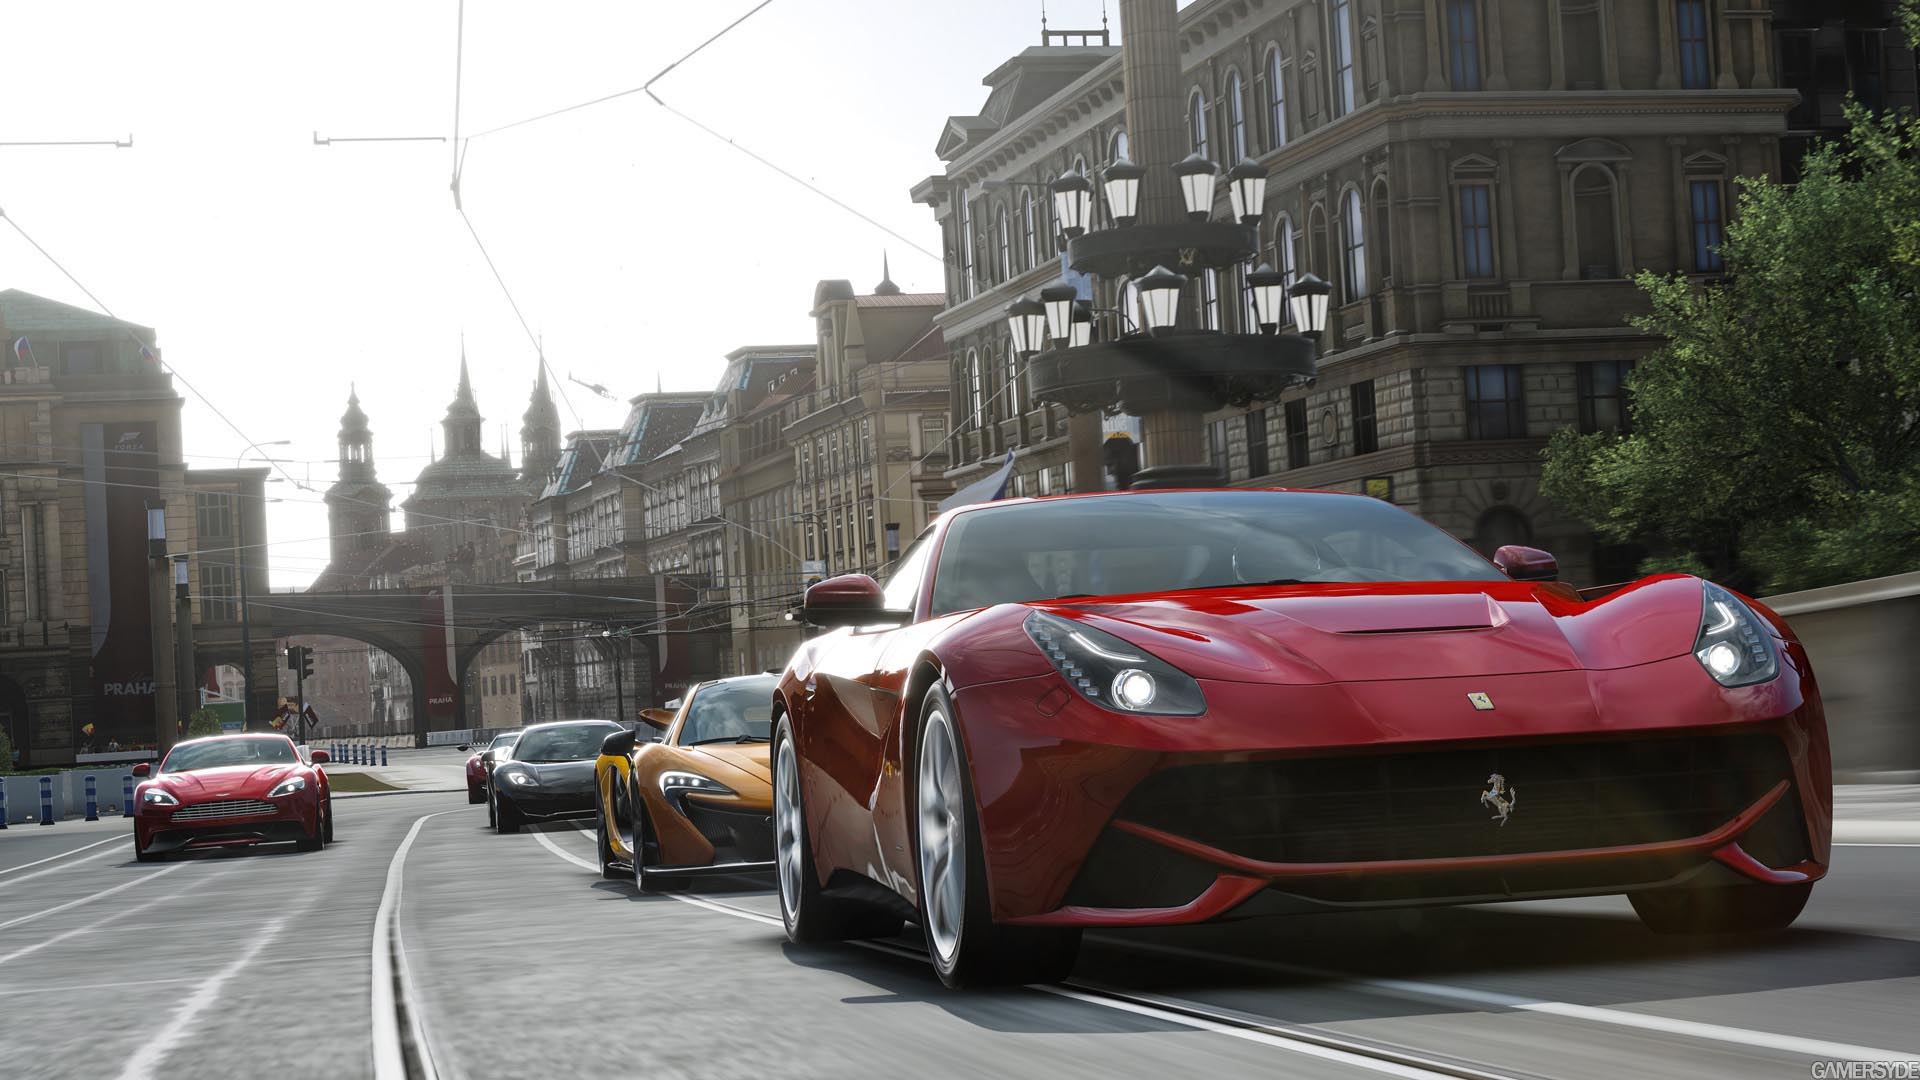 With <i>Forza 6</i> just on the horizon, it’s a good time to jump back onto the track and hone your skills before taking on challengers in the new game. The locked 60 frames-per-second presentation is a mainstay of the series, and though it launched with the Xbox One almost two years ago, the slick graphics have held up in the interim. | <b>For:</b> Xbox One